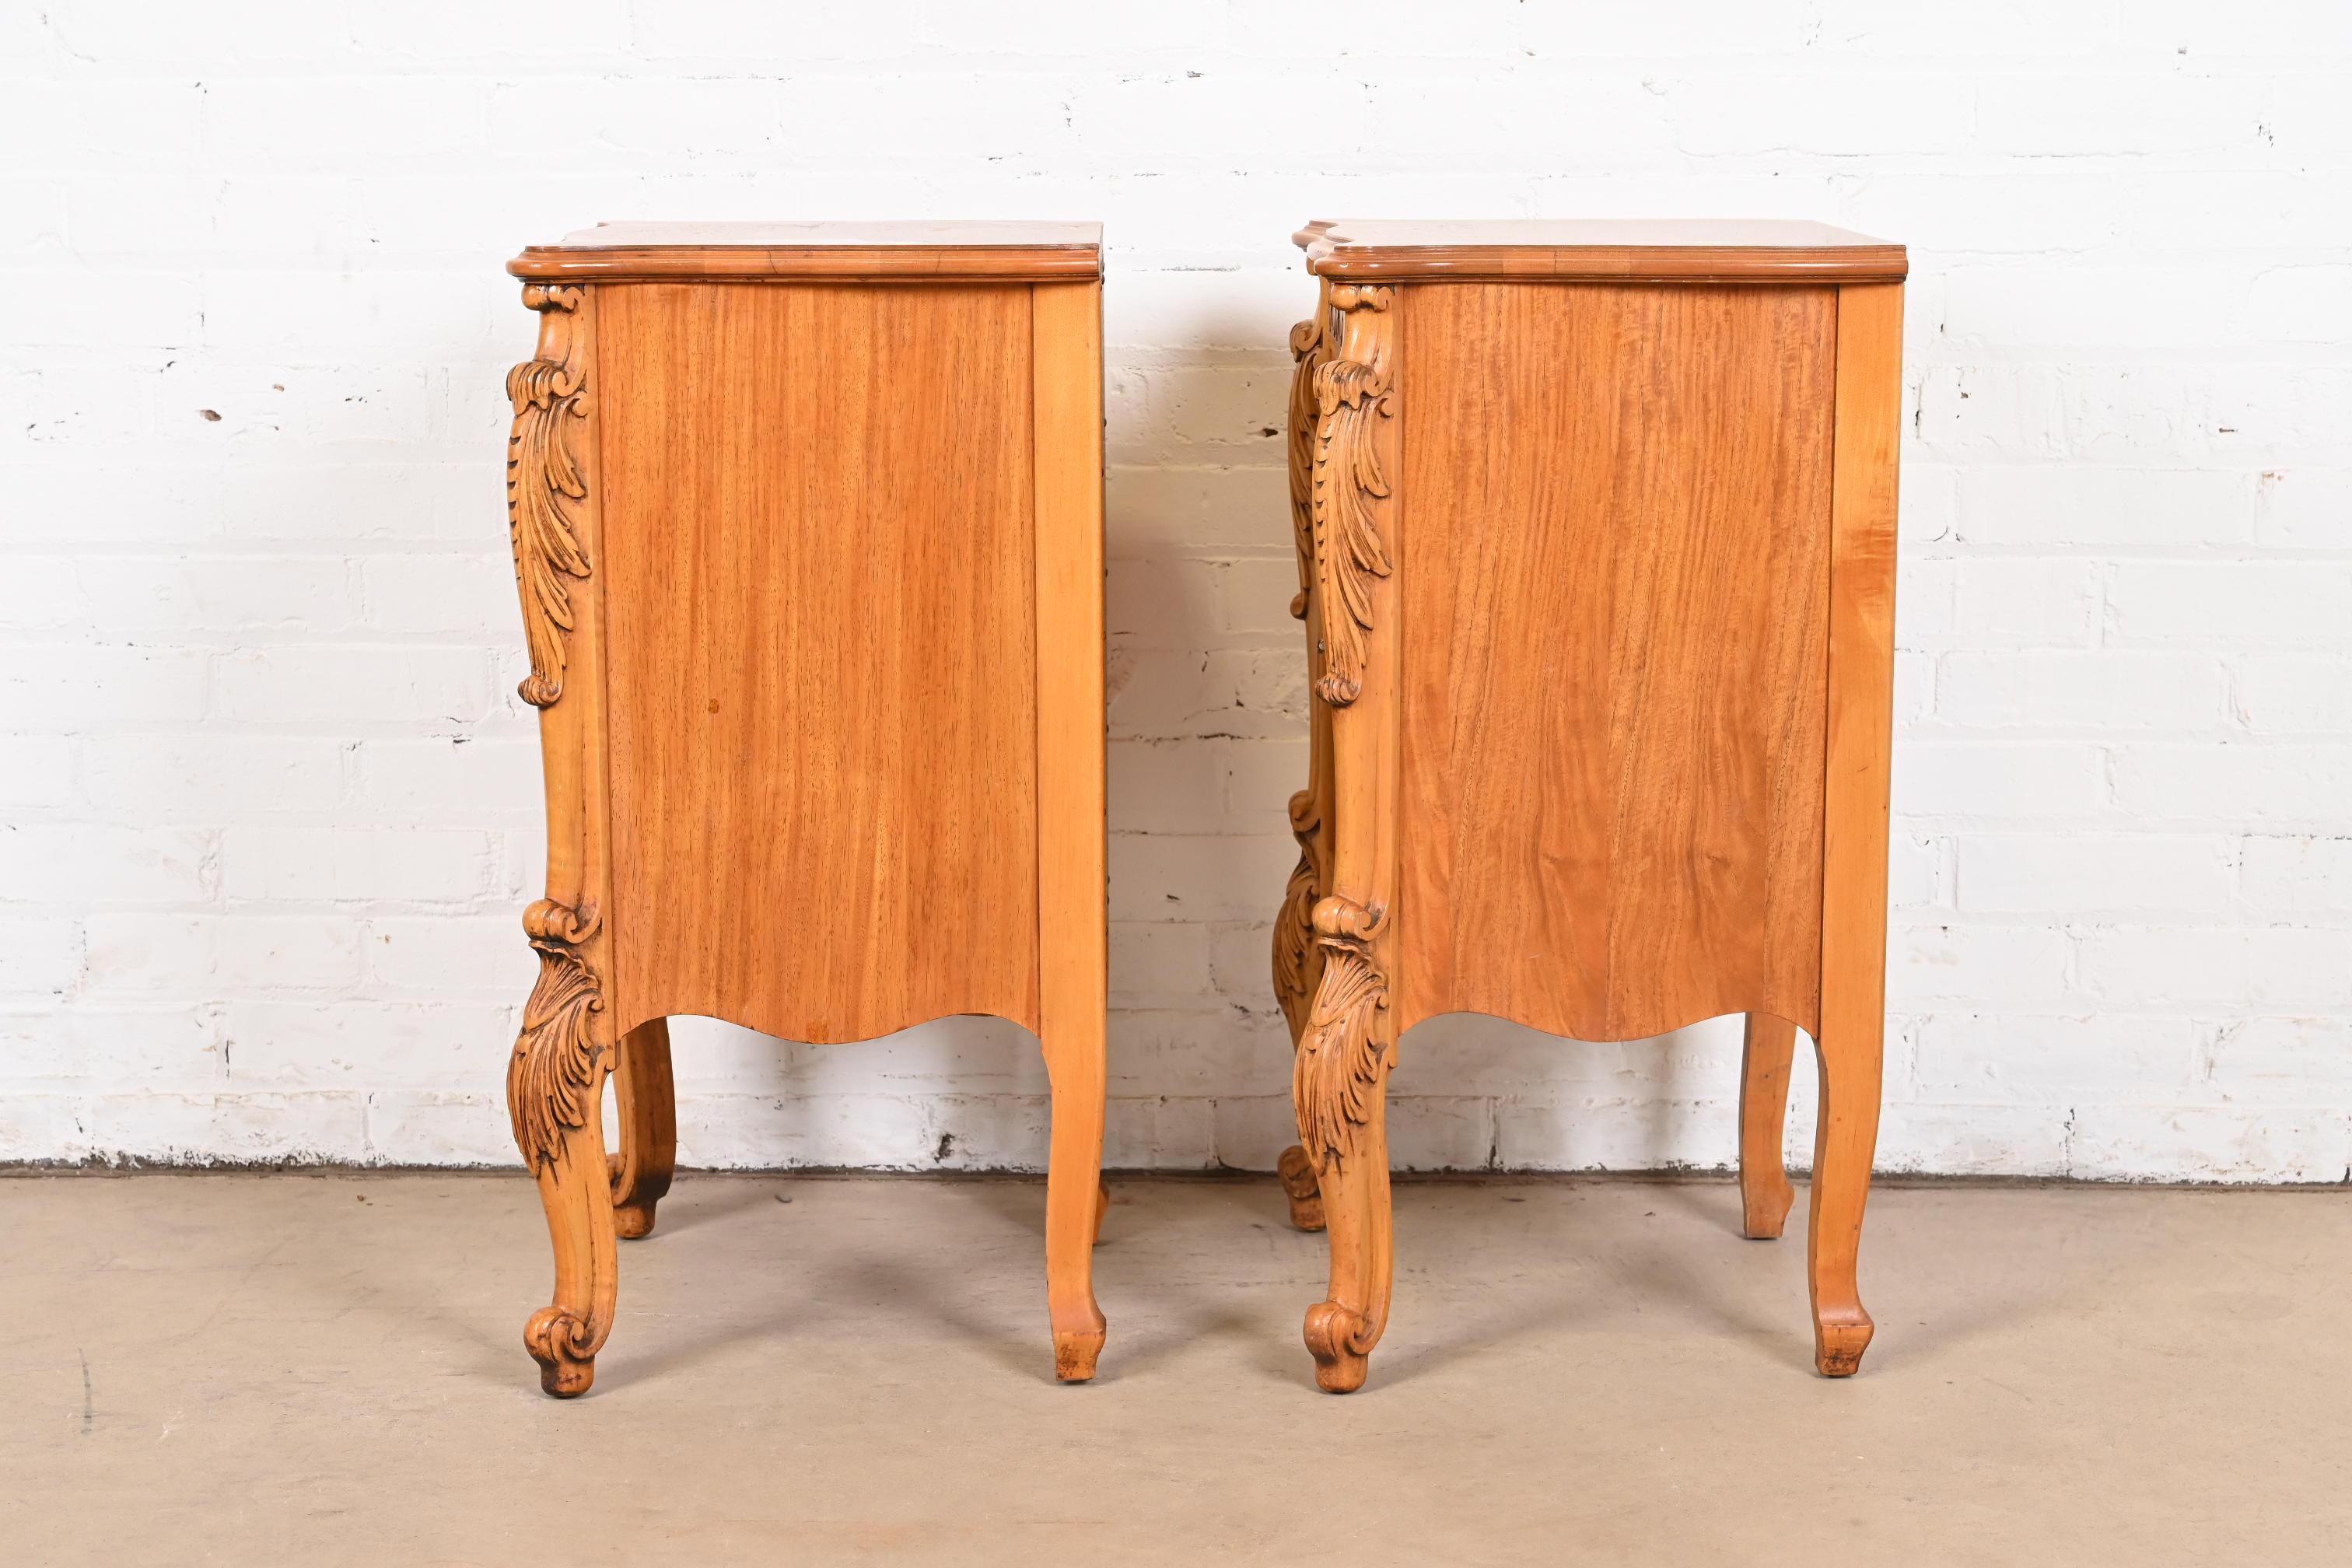 Romweber French Provincial Louis XV Burl Wood Nightstands, Circa 1920s For Sale 4